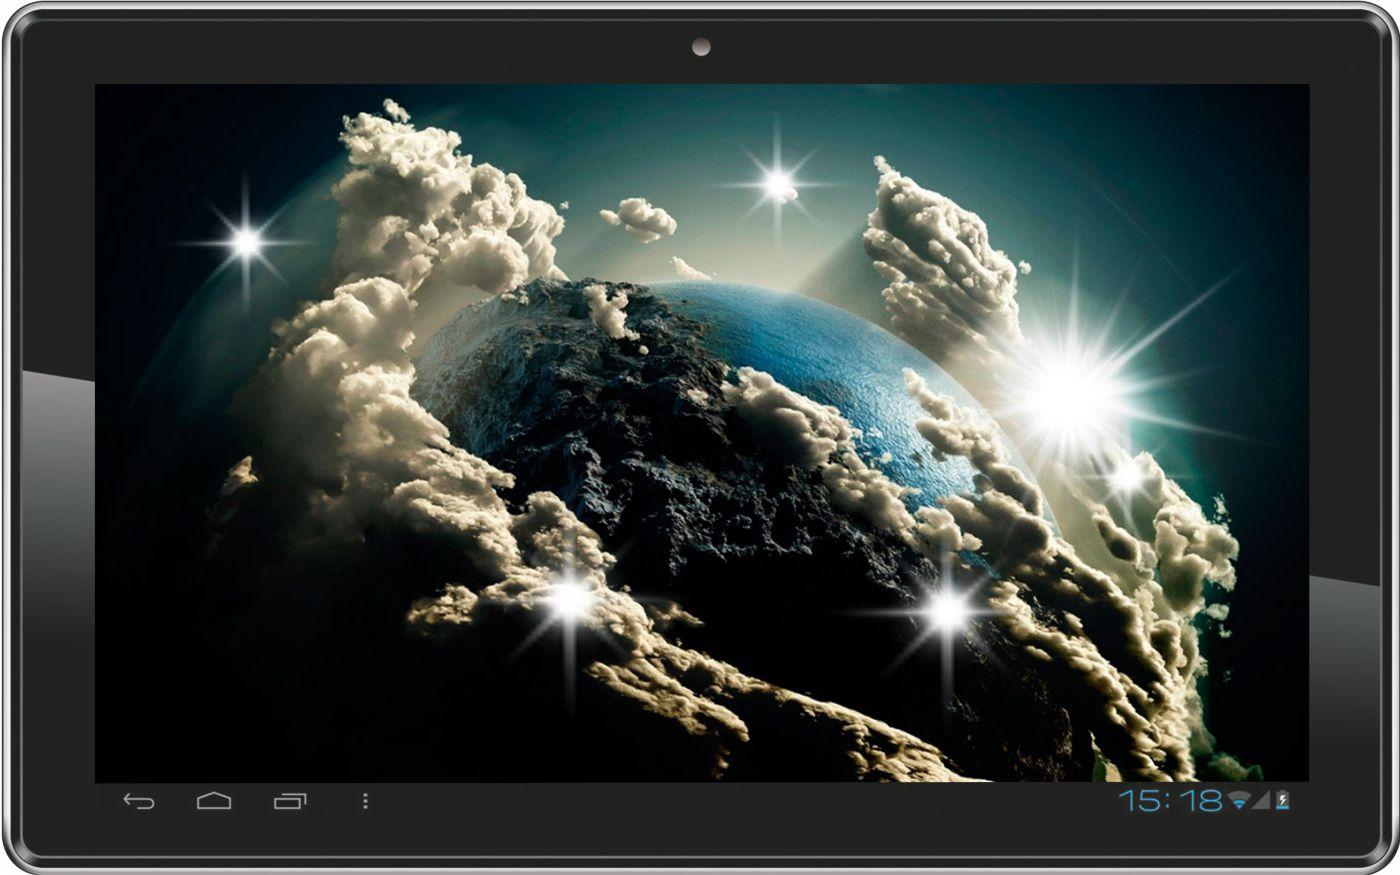 Earth from Moon Live Wallpaper   Android Apps on Google Play 1400x875